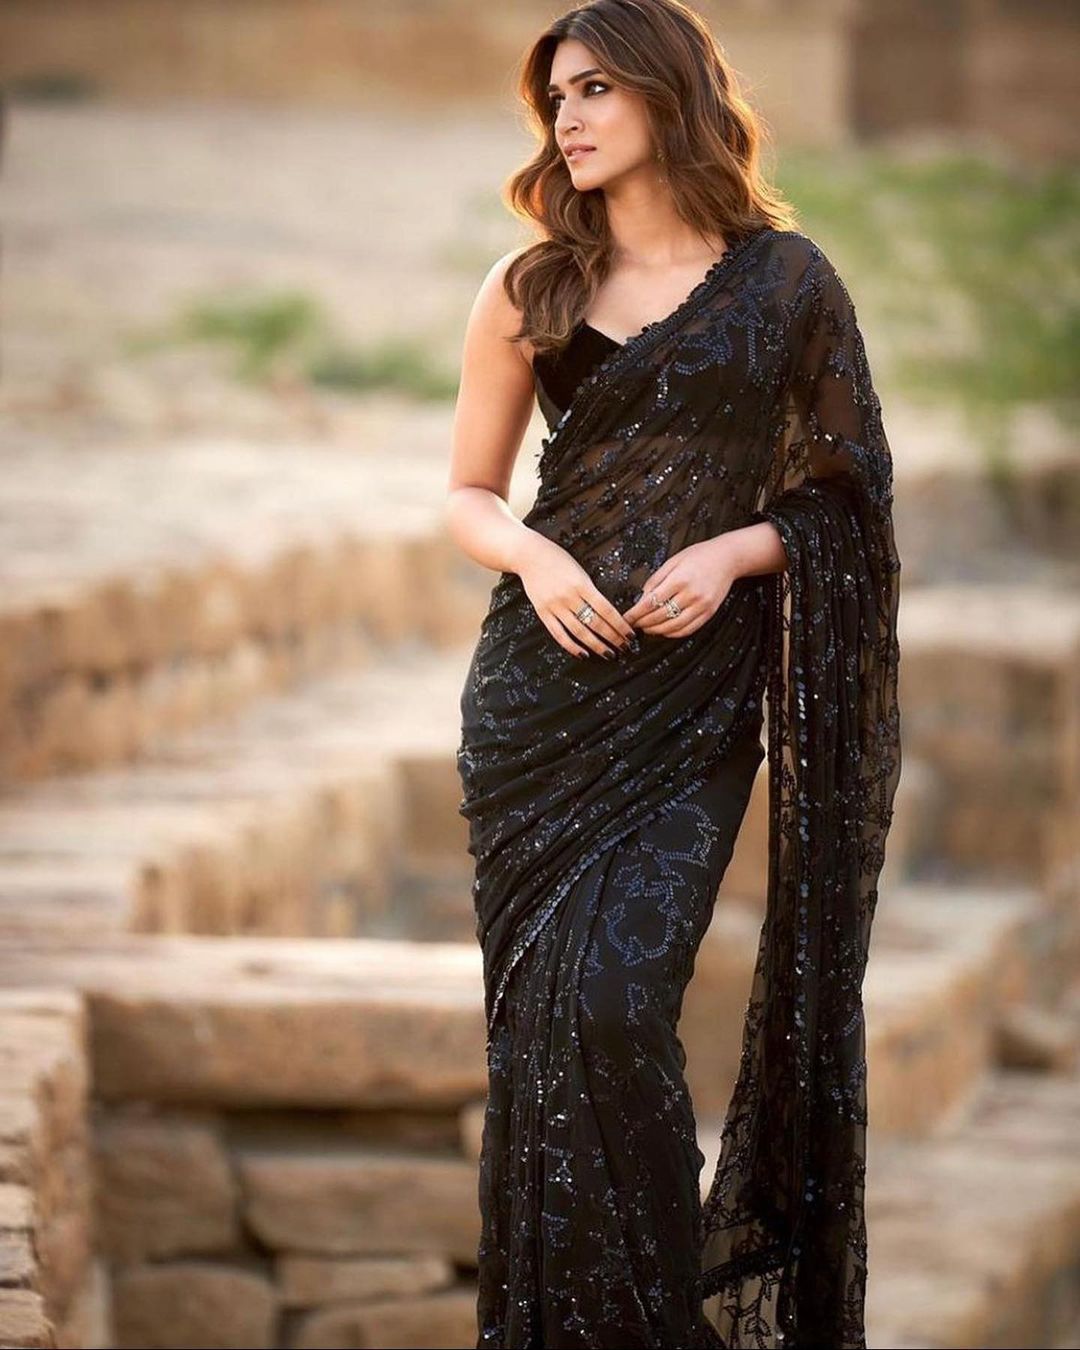 Kriti Sanon is flaunting her sensuous figure in a shimmering black saree